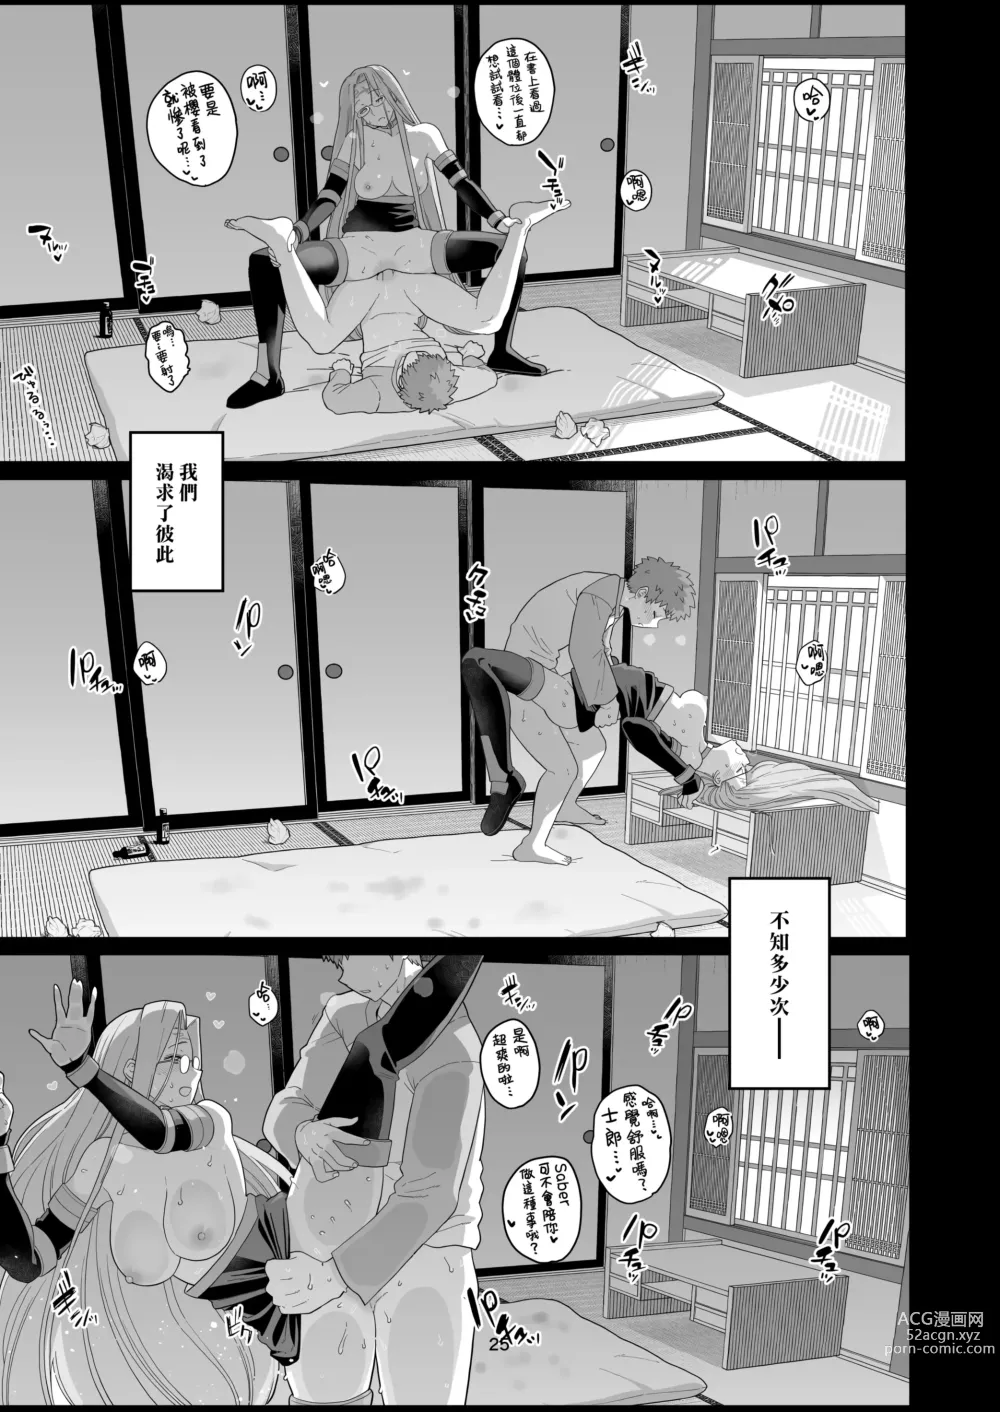 Page 28 of doujinshi Rider小姐的偷吃 (decensored)